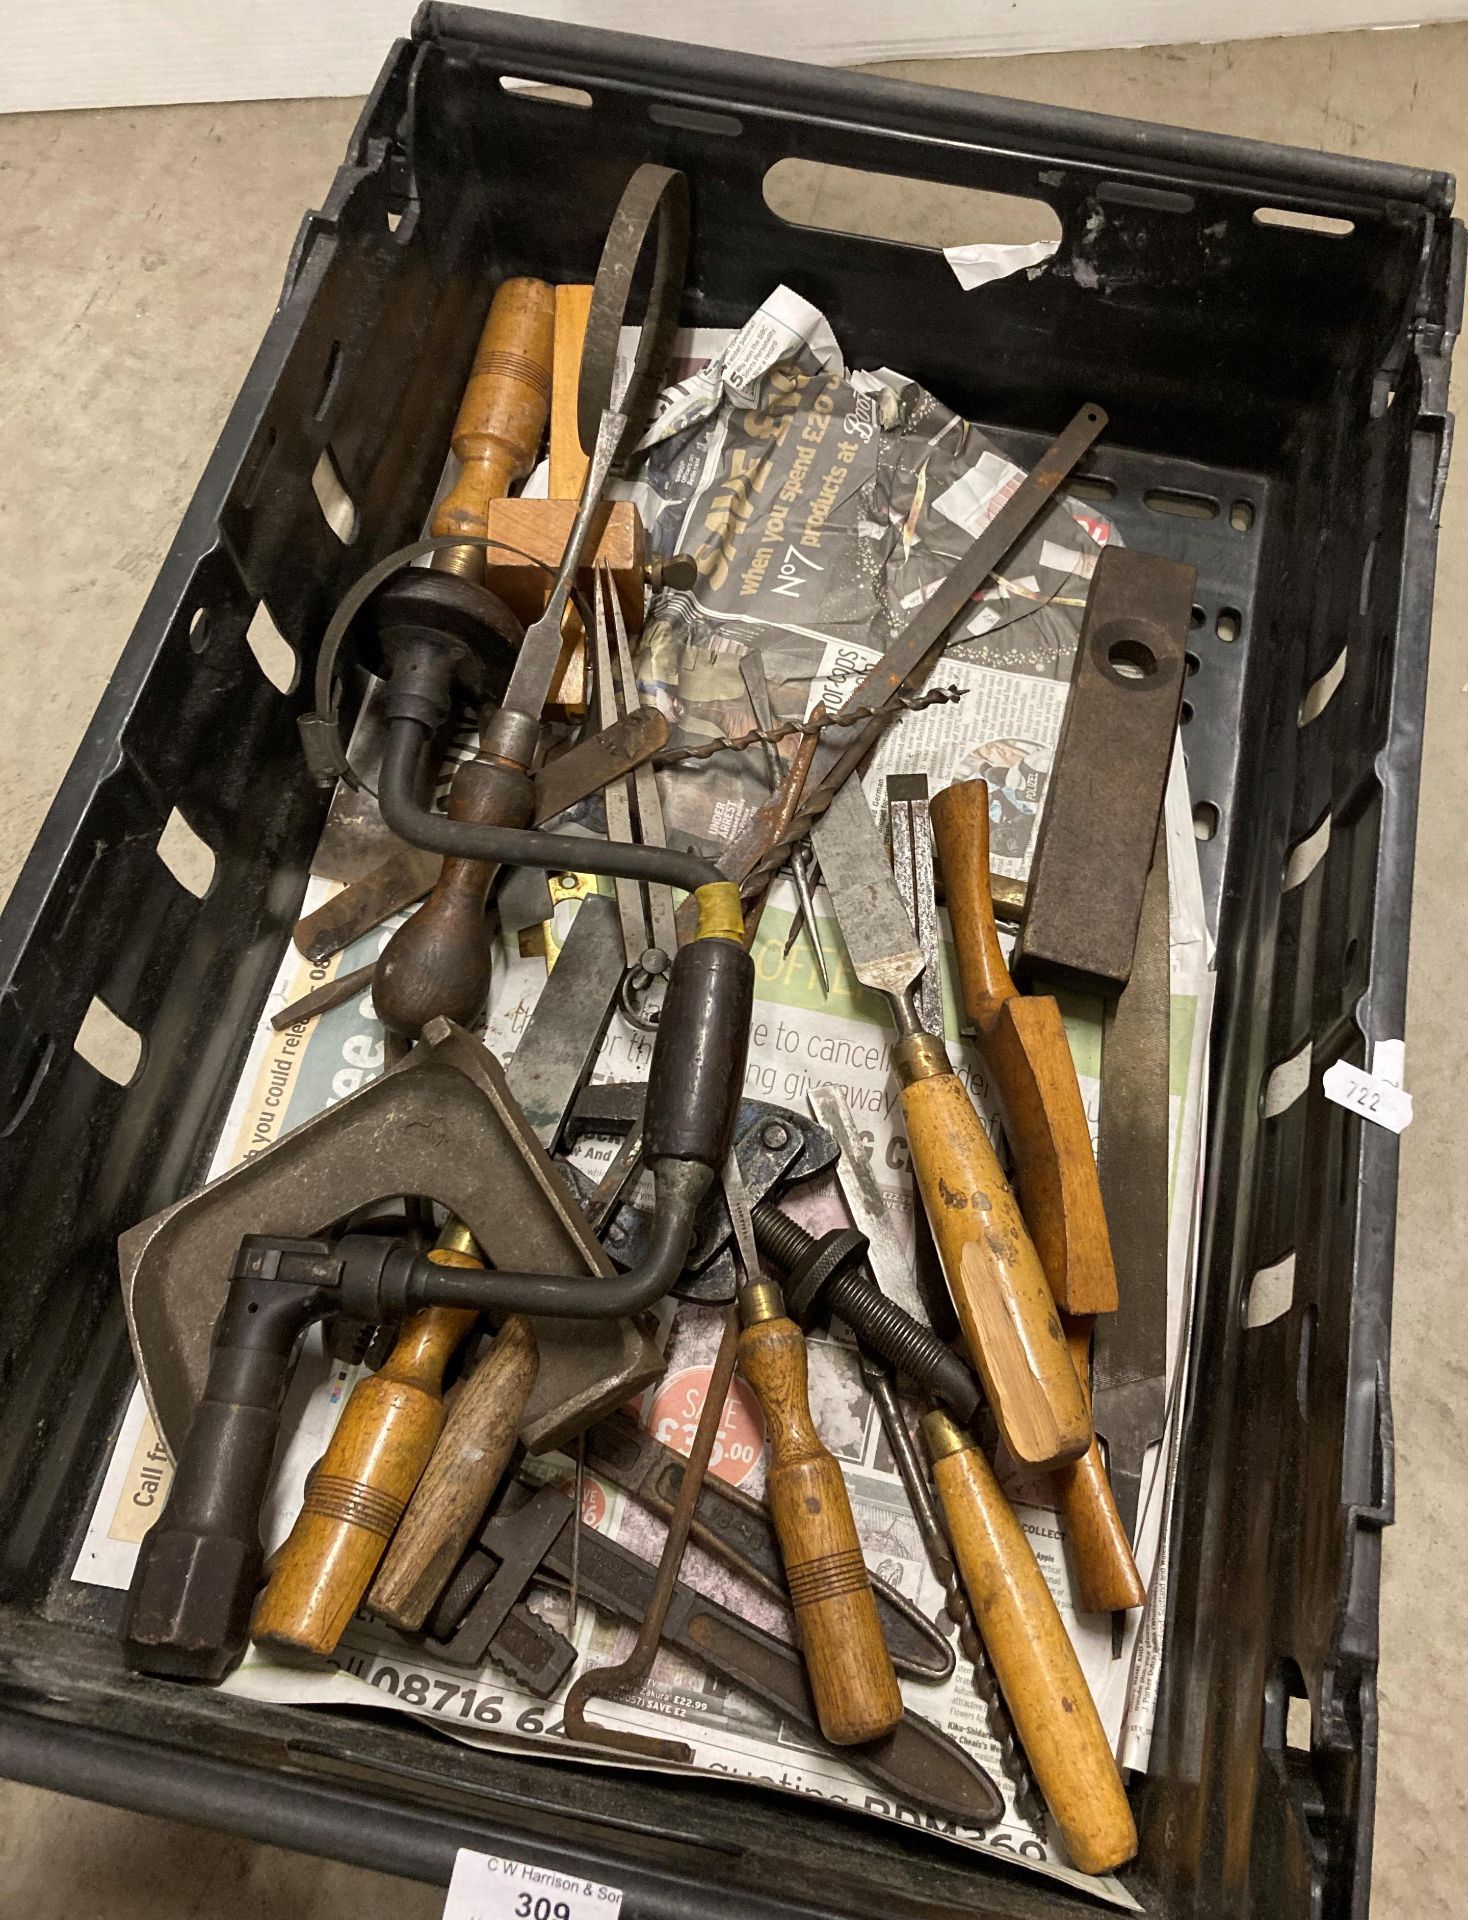 Contents to crate - assorted wood working tools including box planes, bit and brace, chisels, - Image 3 of 3